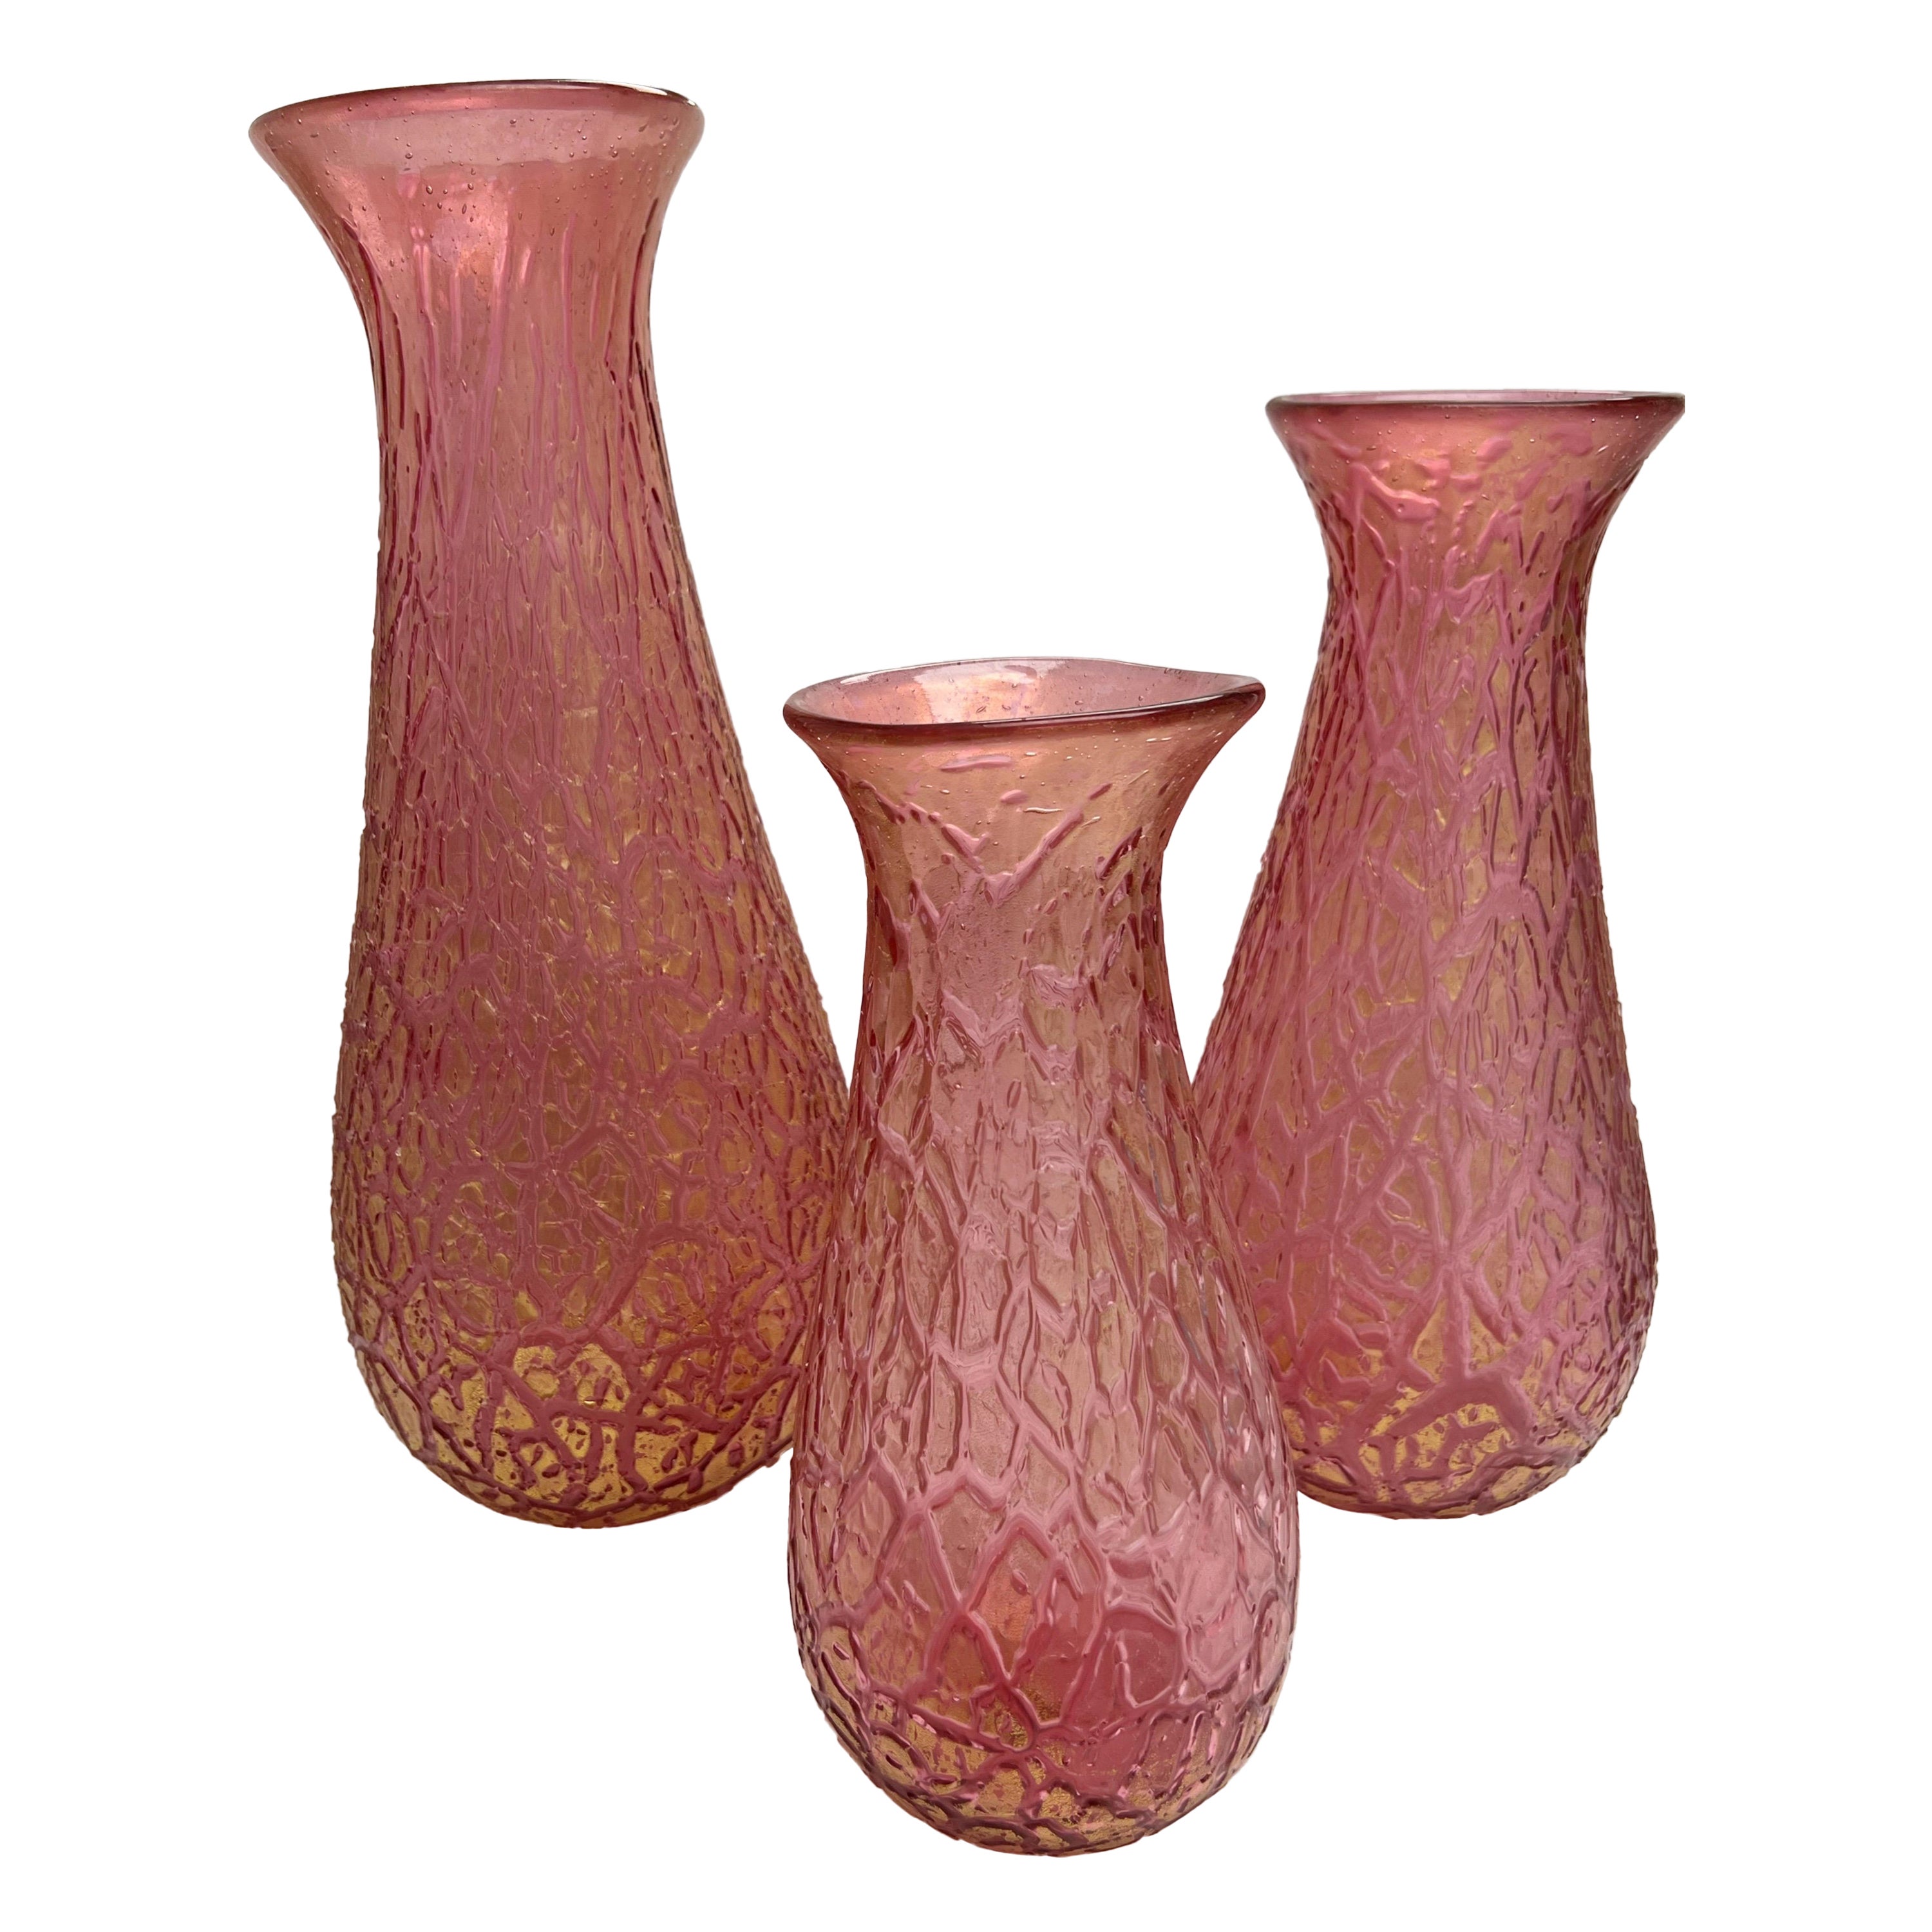 Enricco Cammozzo Murano Glass Set of 3 Large Vessels (3 grands récipients)